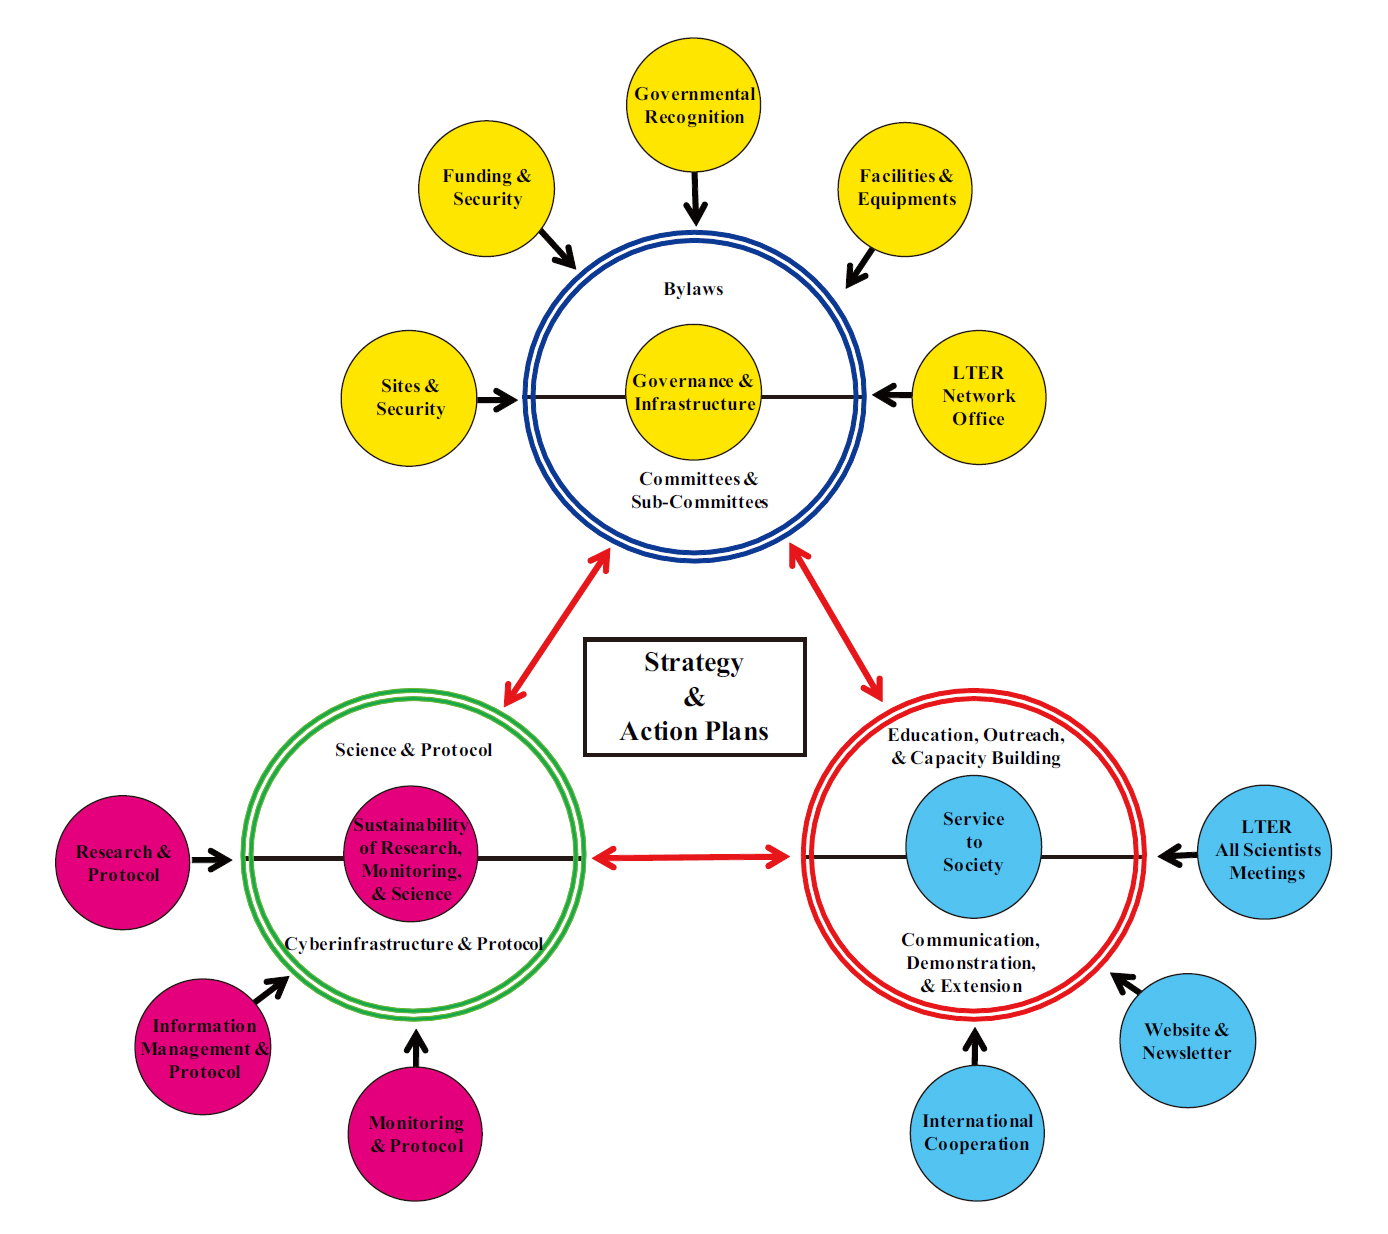 A diagram for considering a strategic plan for the Korea Long-Term Ecological Research Network